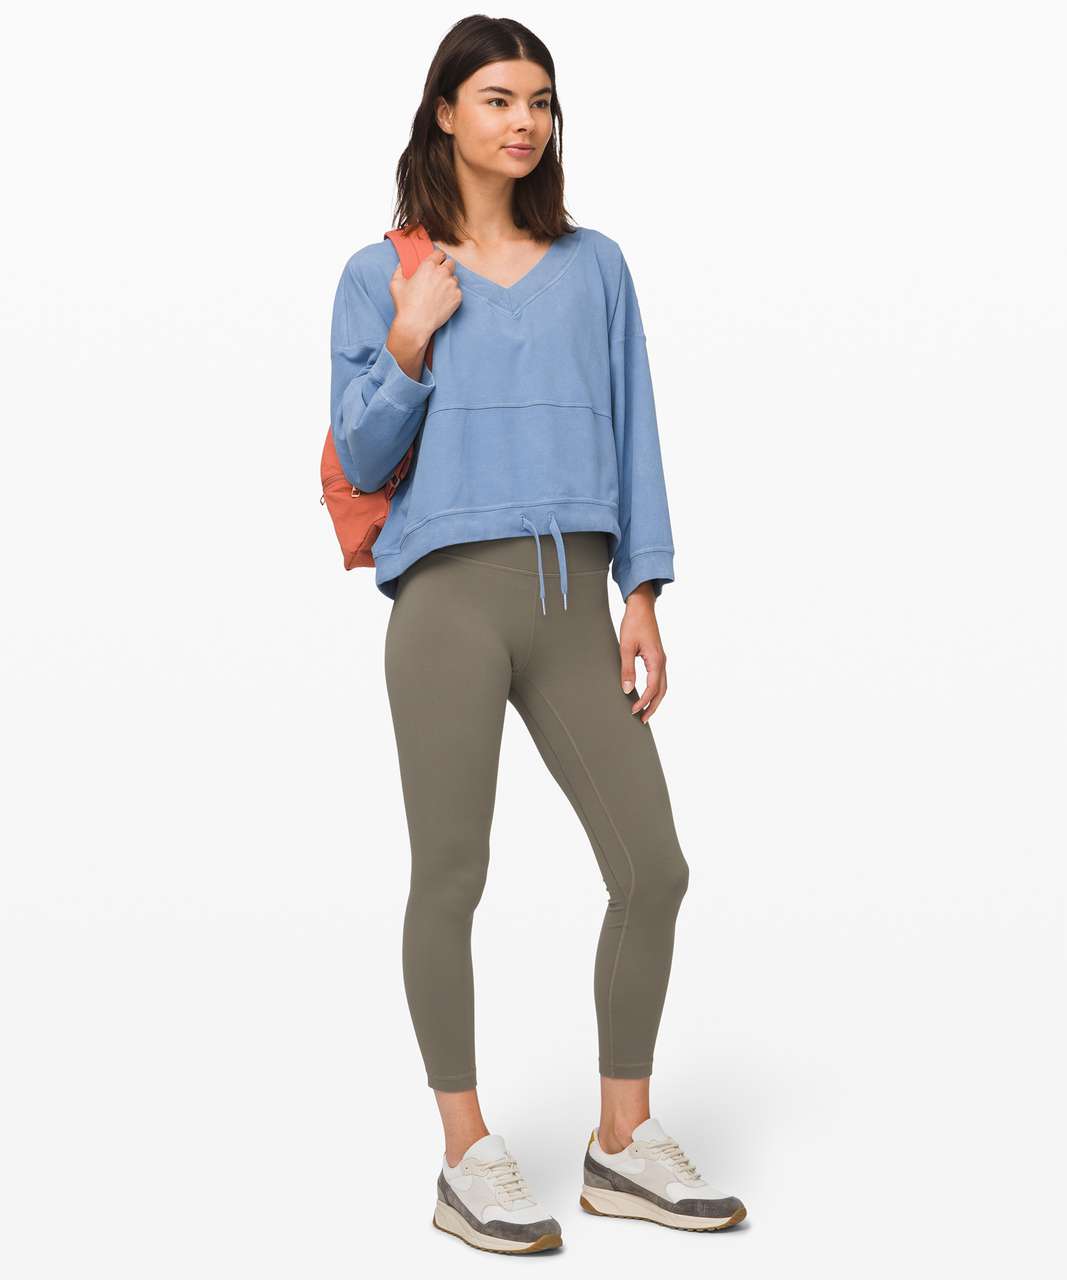 Lululemon Dare the Day Pullover - Washed Tempest Blue